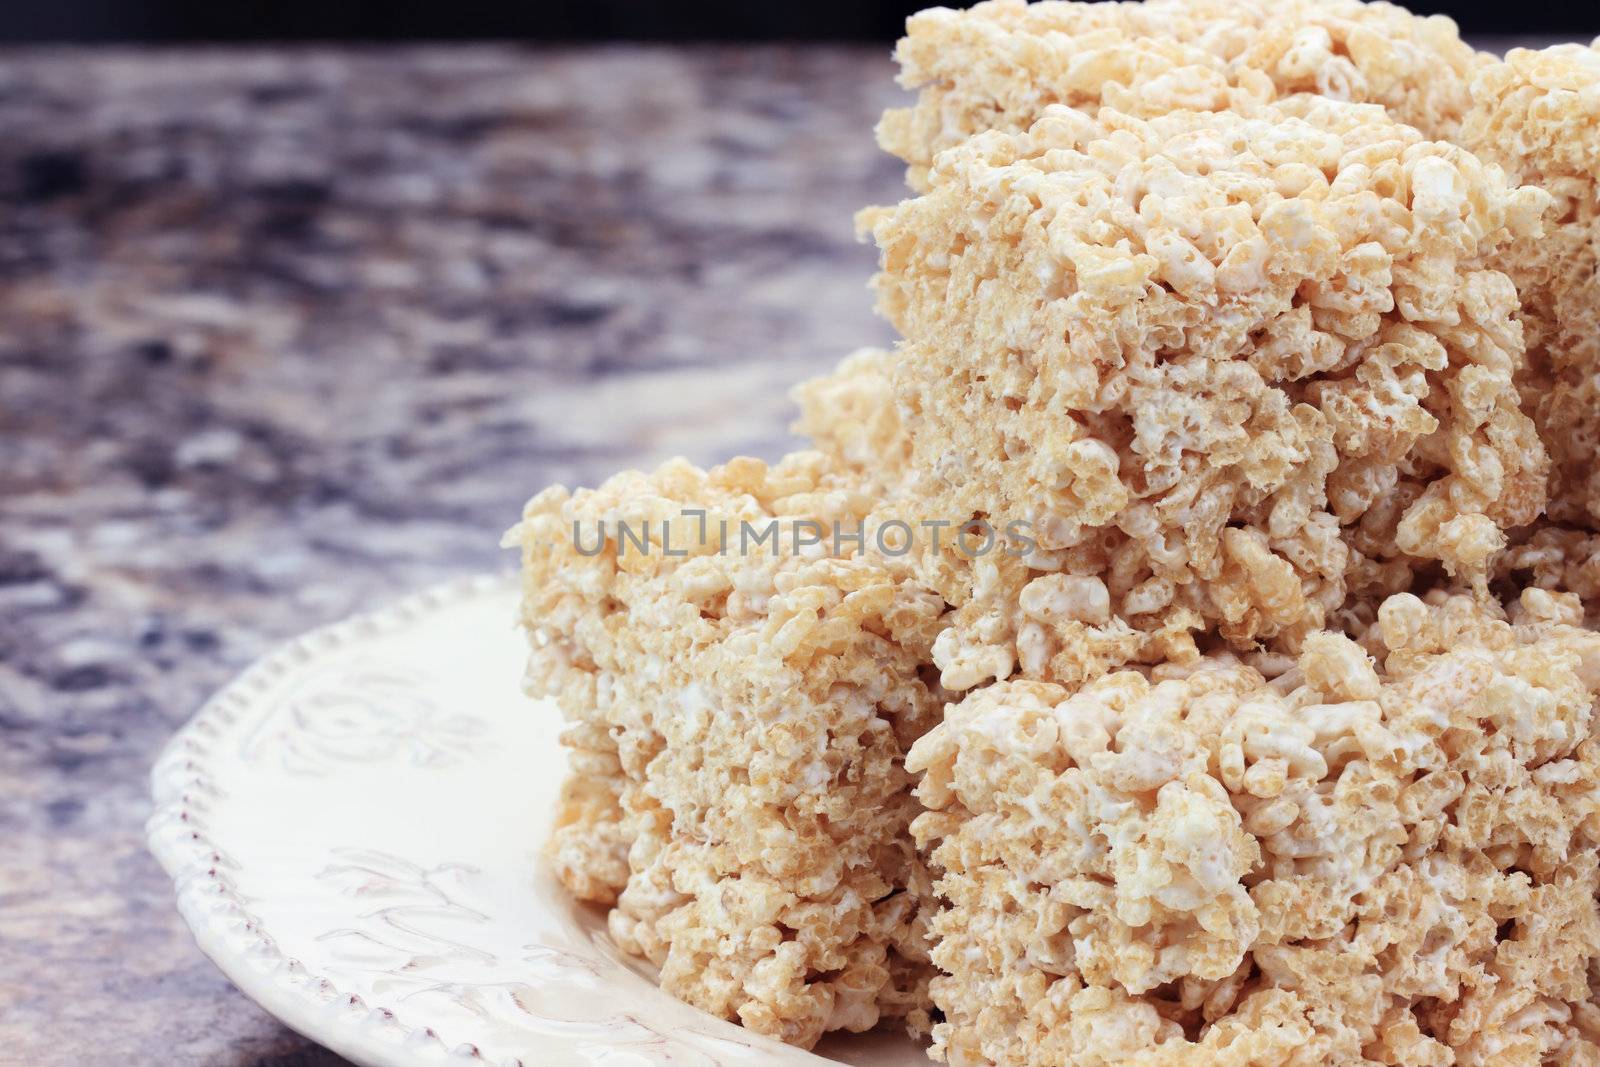 Marshmallow and Rice Cereal Bars by StephanieFrey